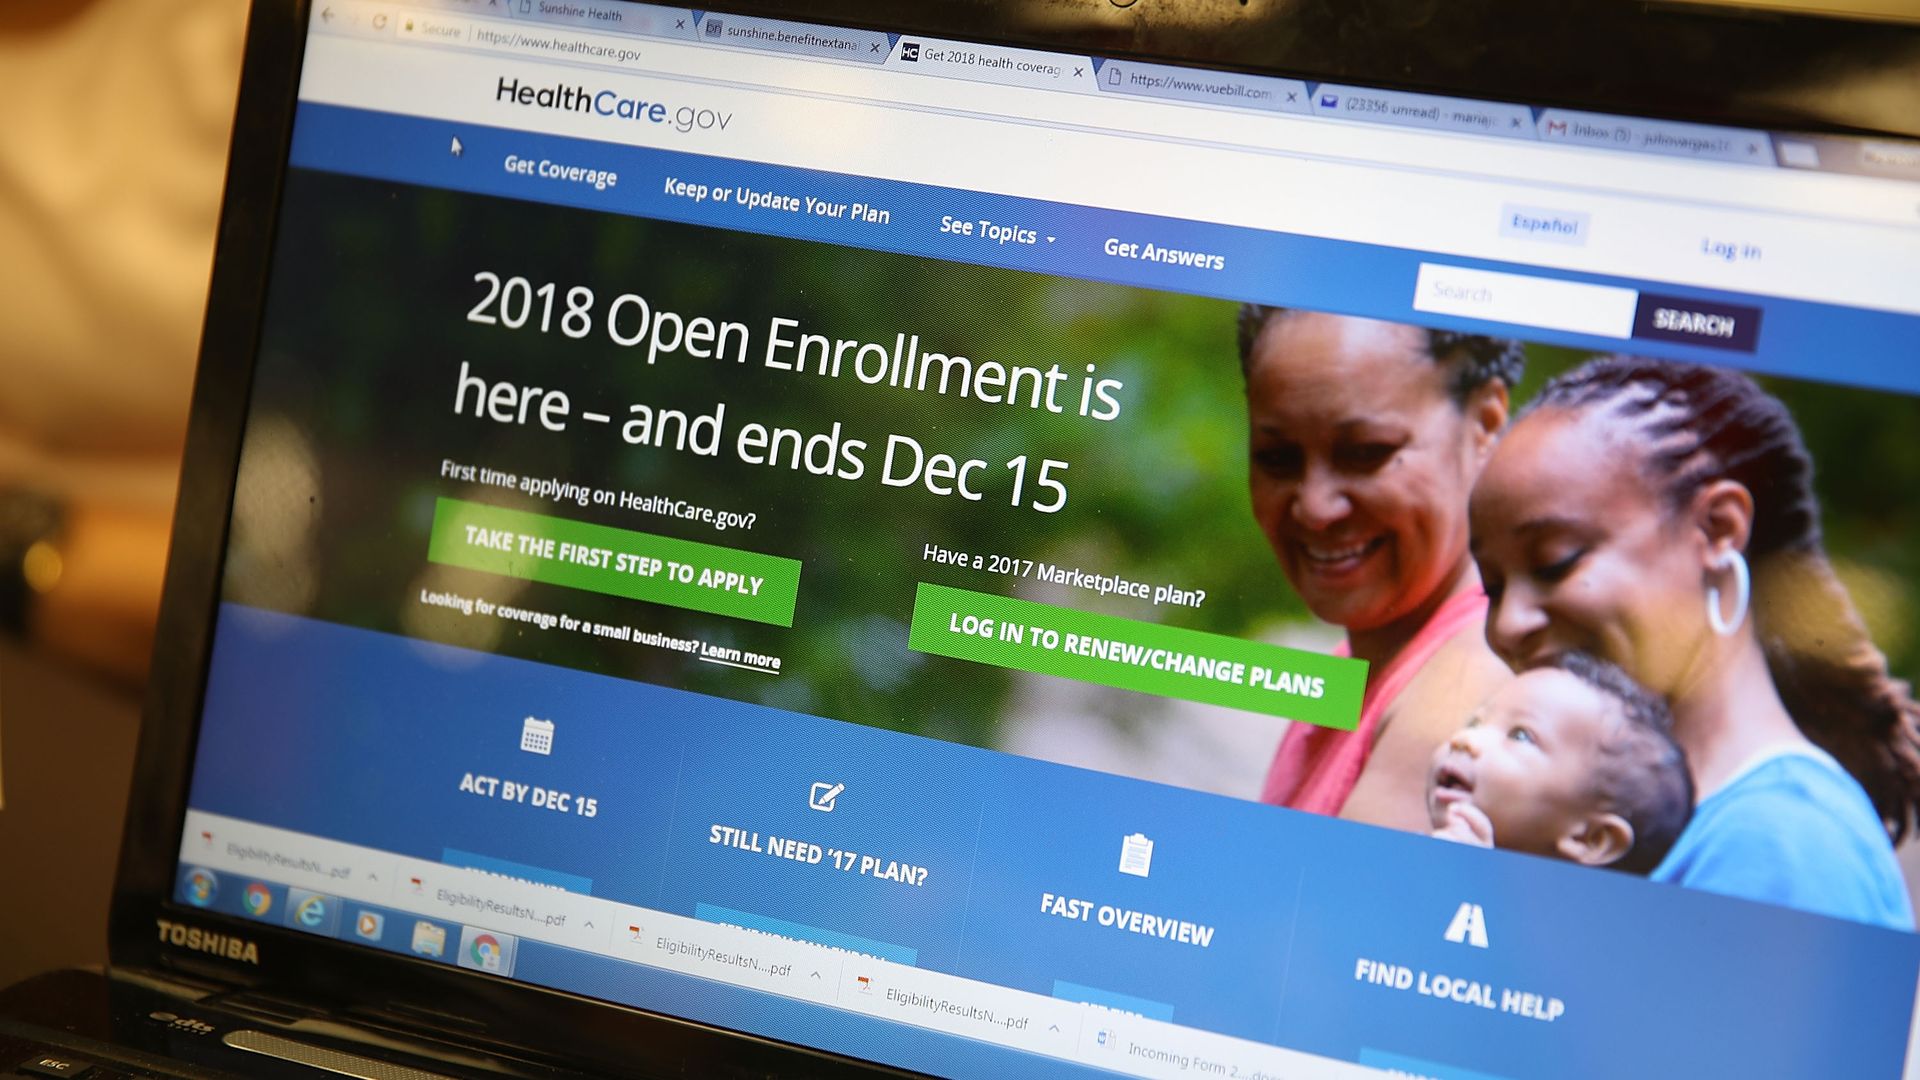 A screenshot of the Affordable Care Act enrollment website